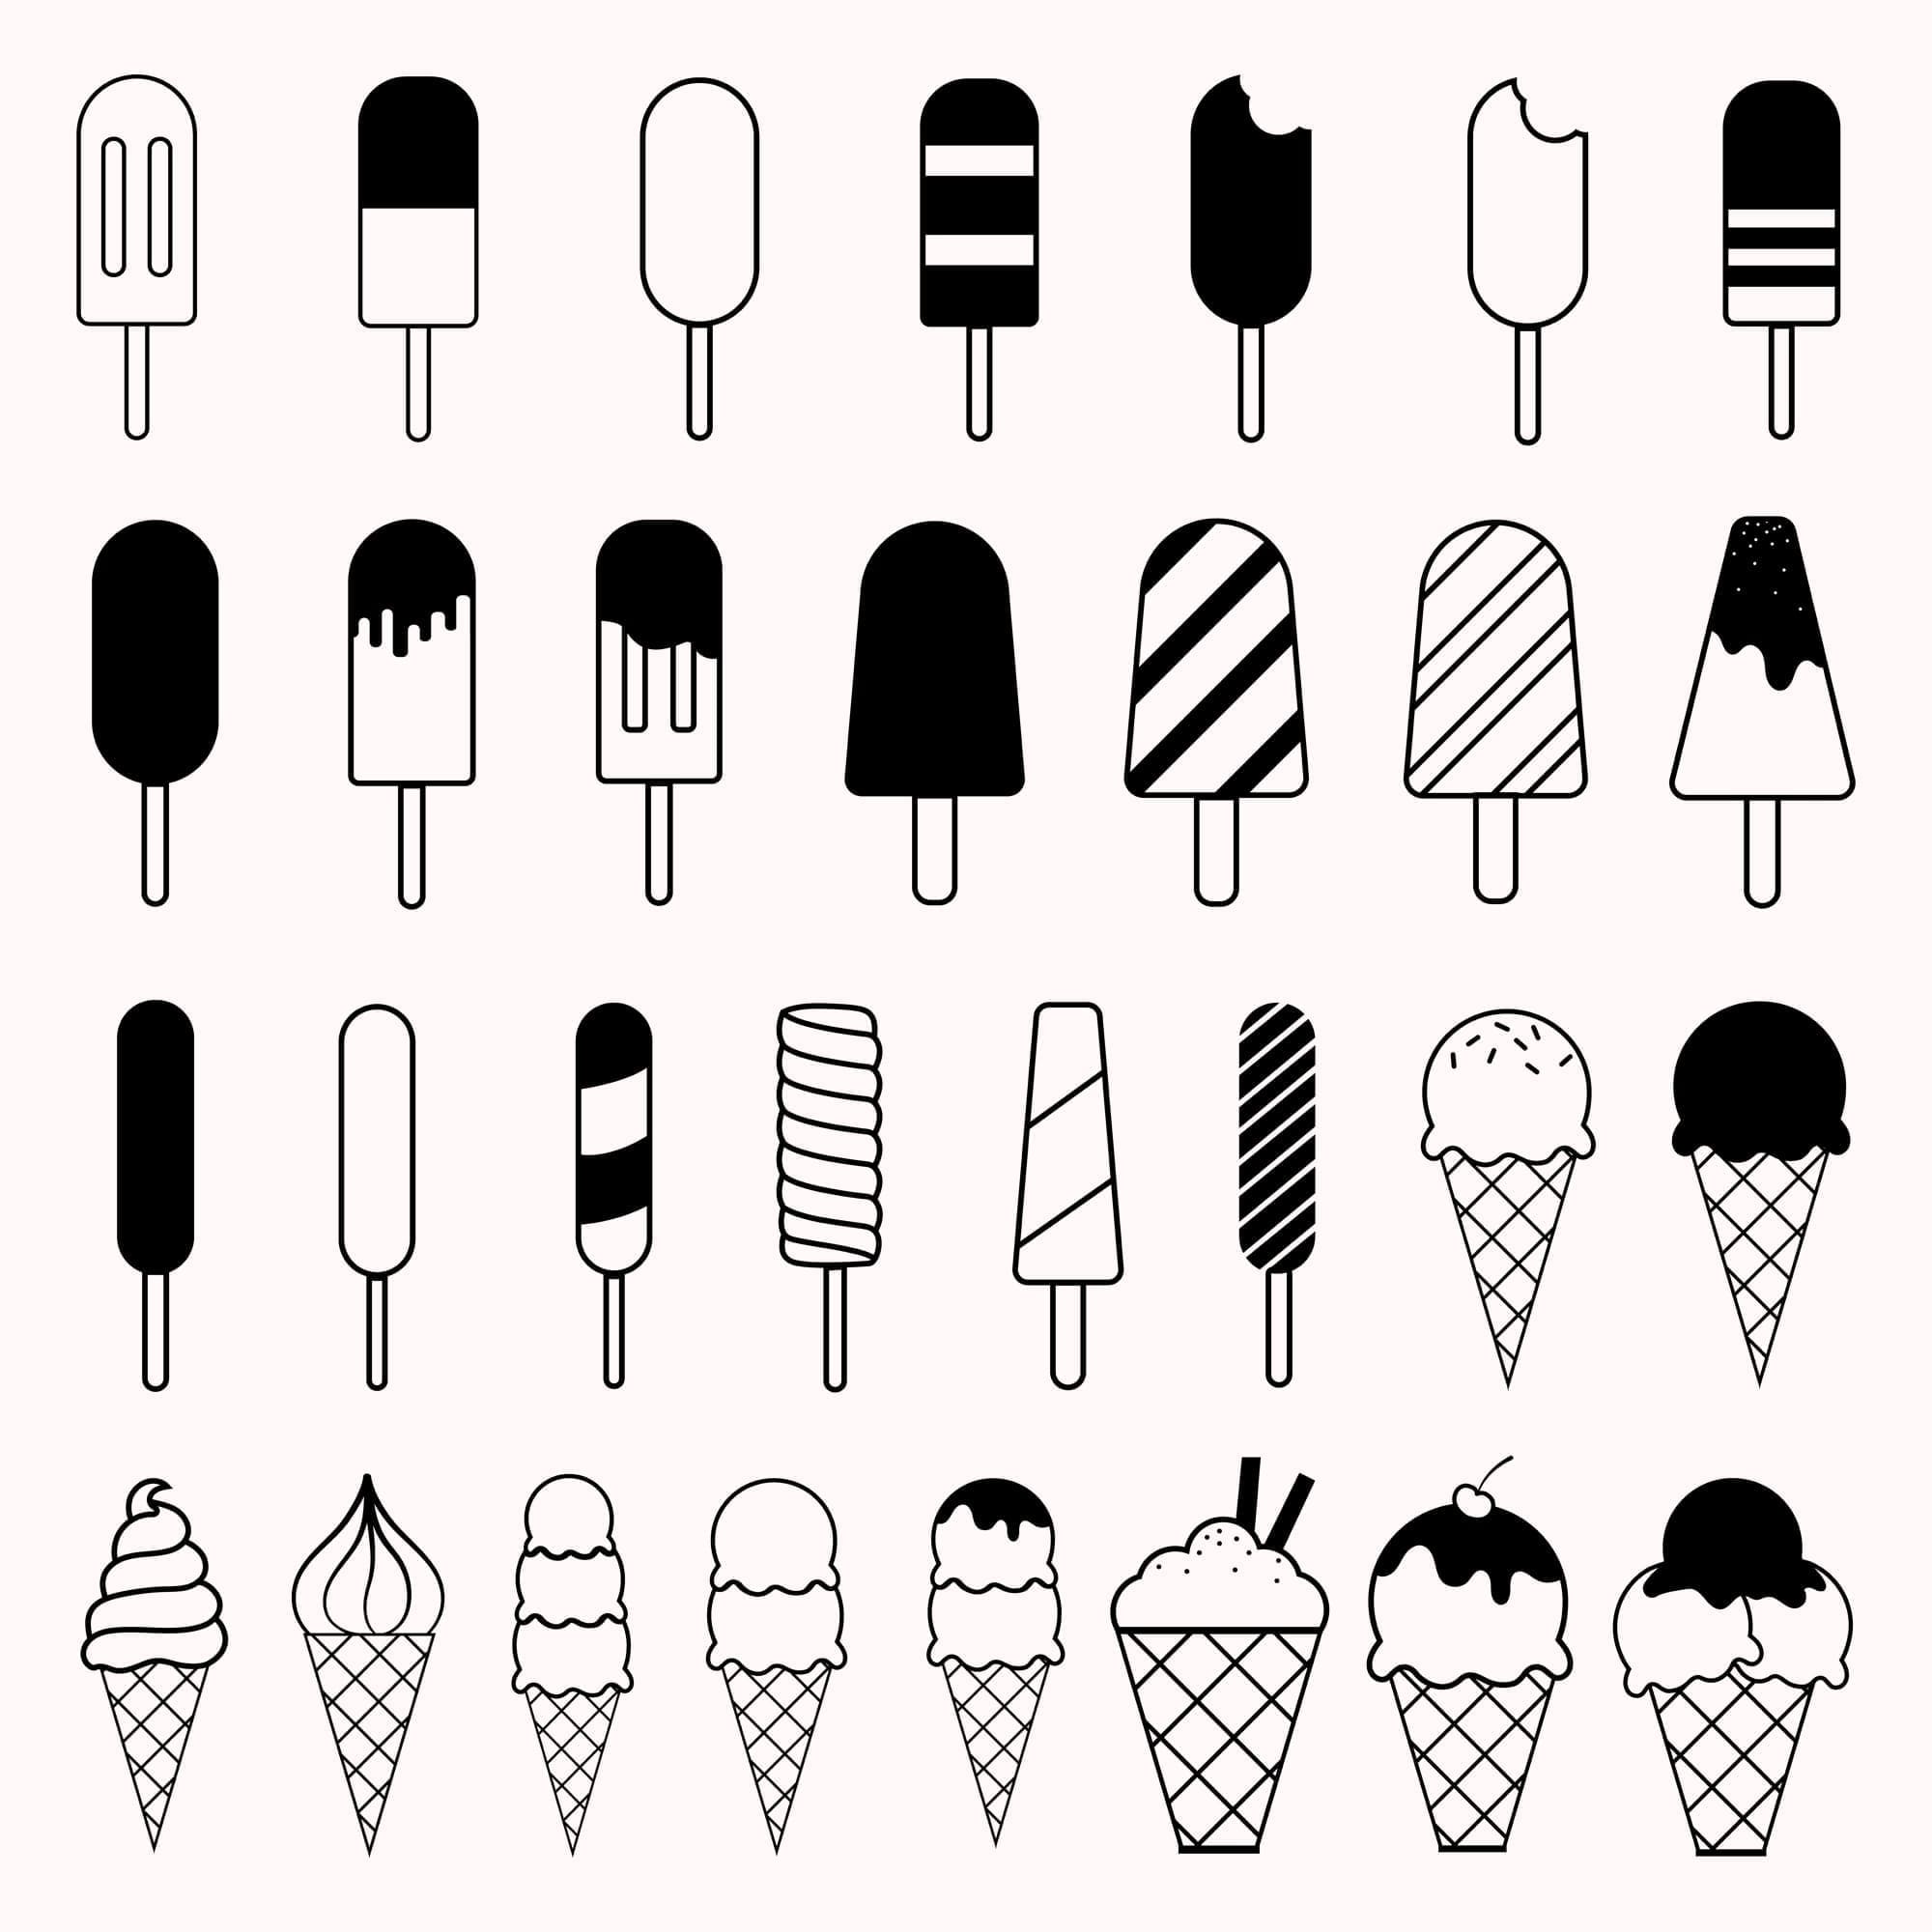 Ice cream on a stick and in a waffle cup drawn on a white background.